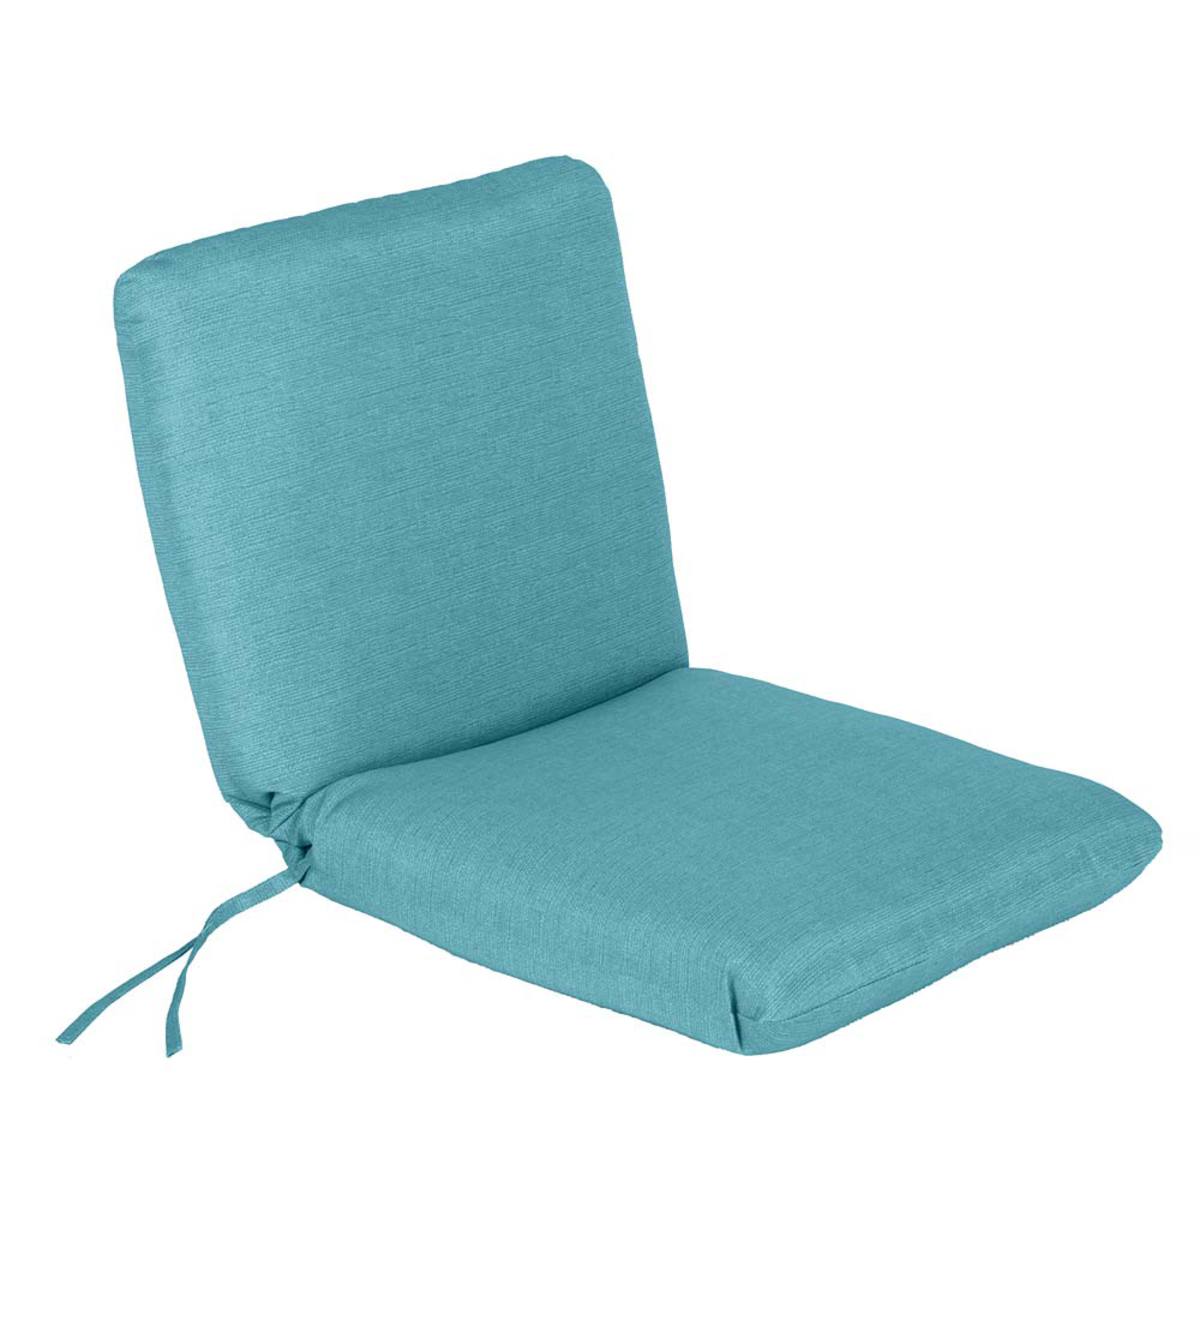 Shenandoah Outdoor Chair Seat/Back Cushion with Hinge